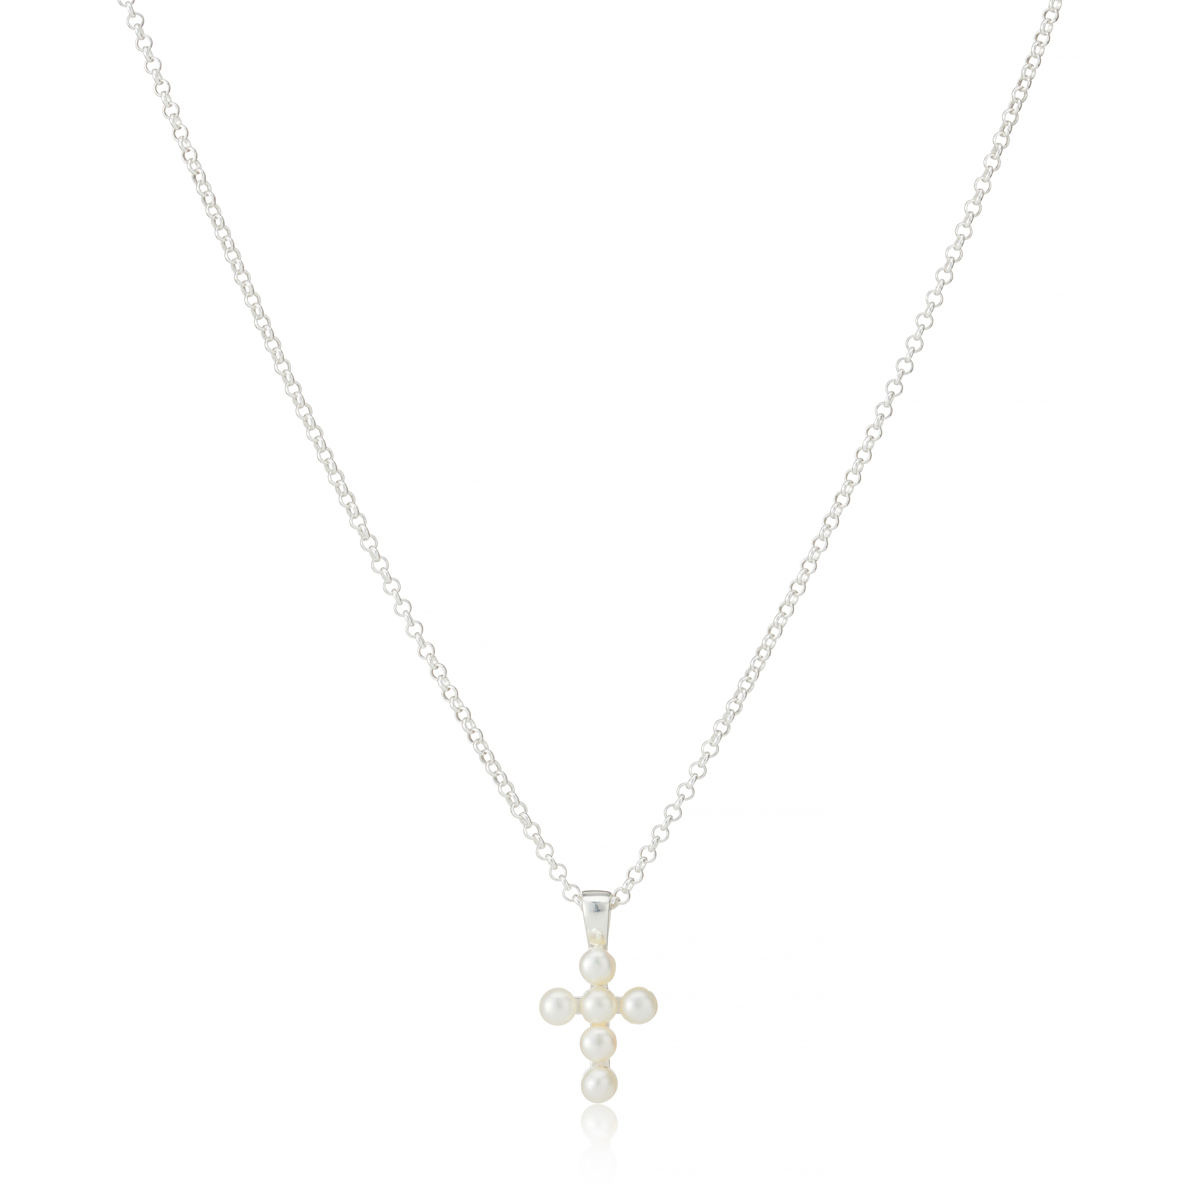 Freshwater Pearl Serenity Cross Necklace